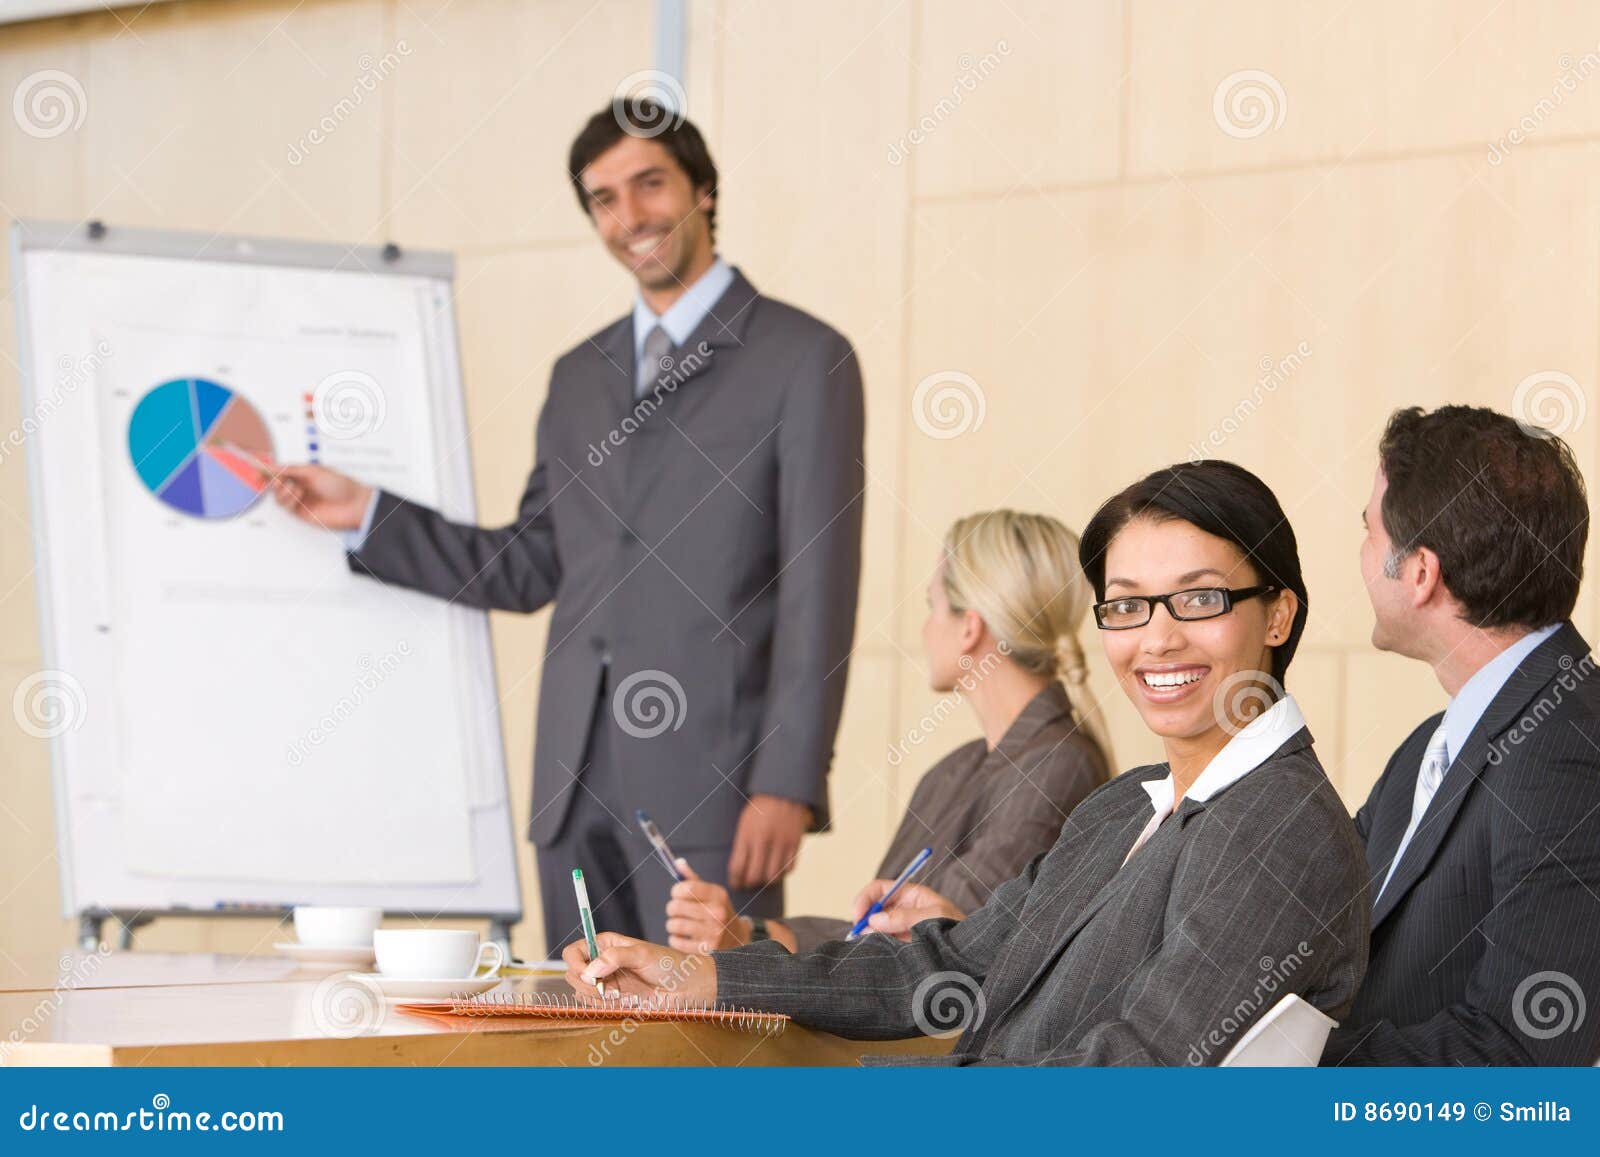 image of someone giving a presentation